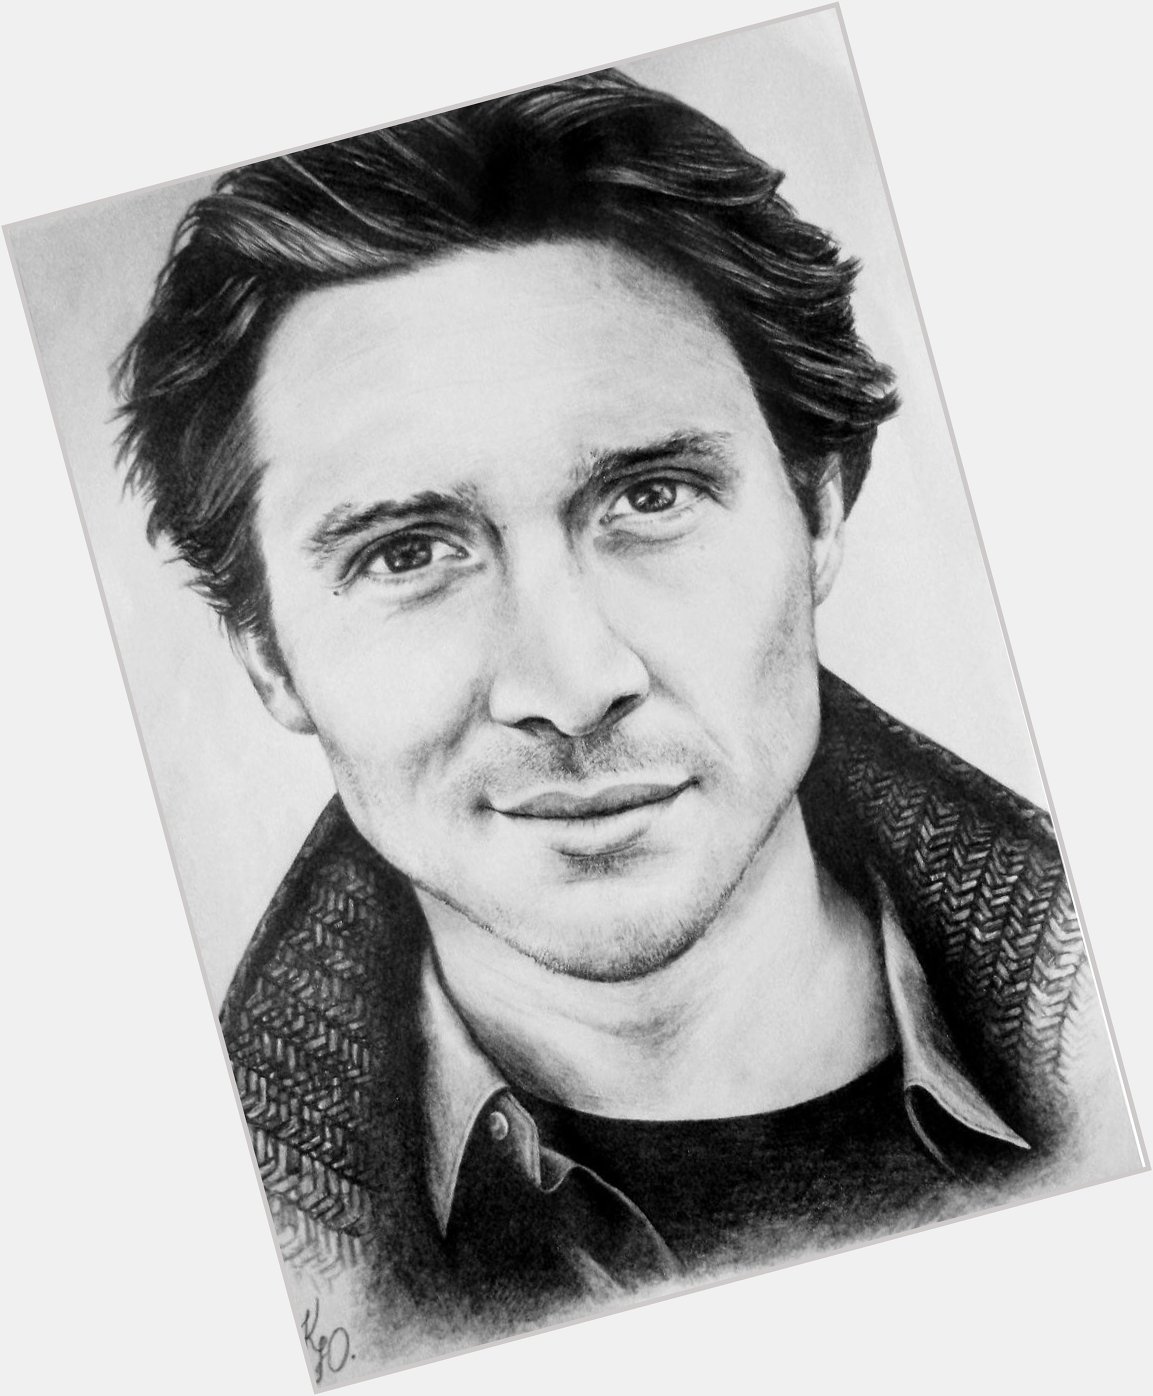  I drew this portrait in pencil as a gift to you. Happy Birthday, David =) 